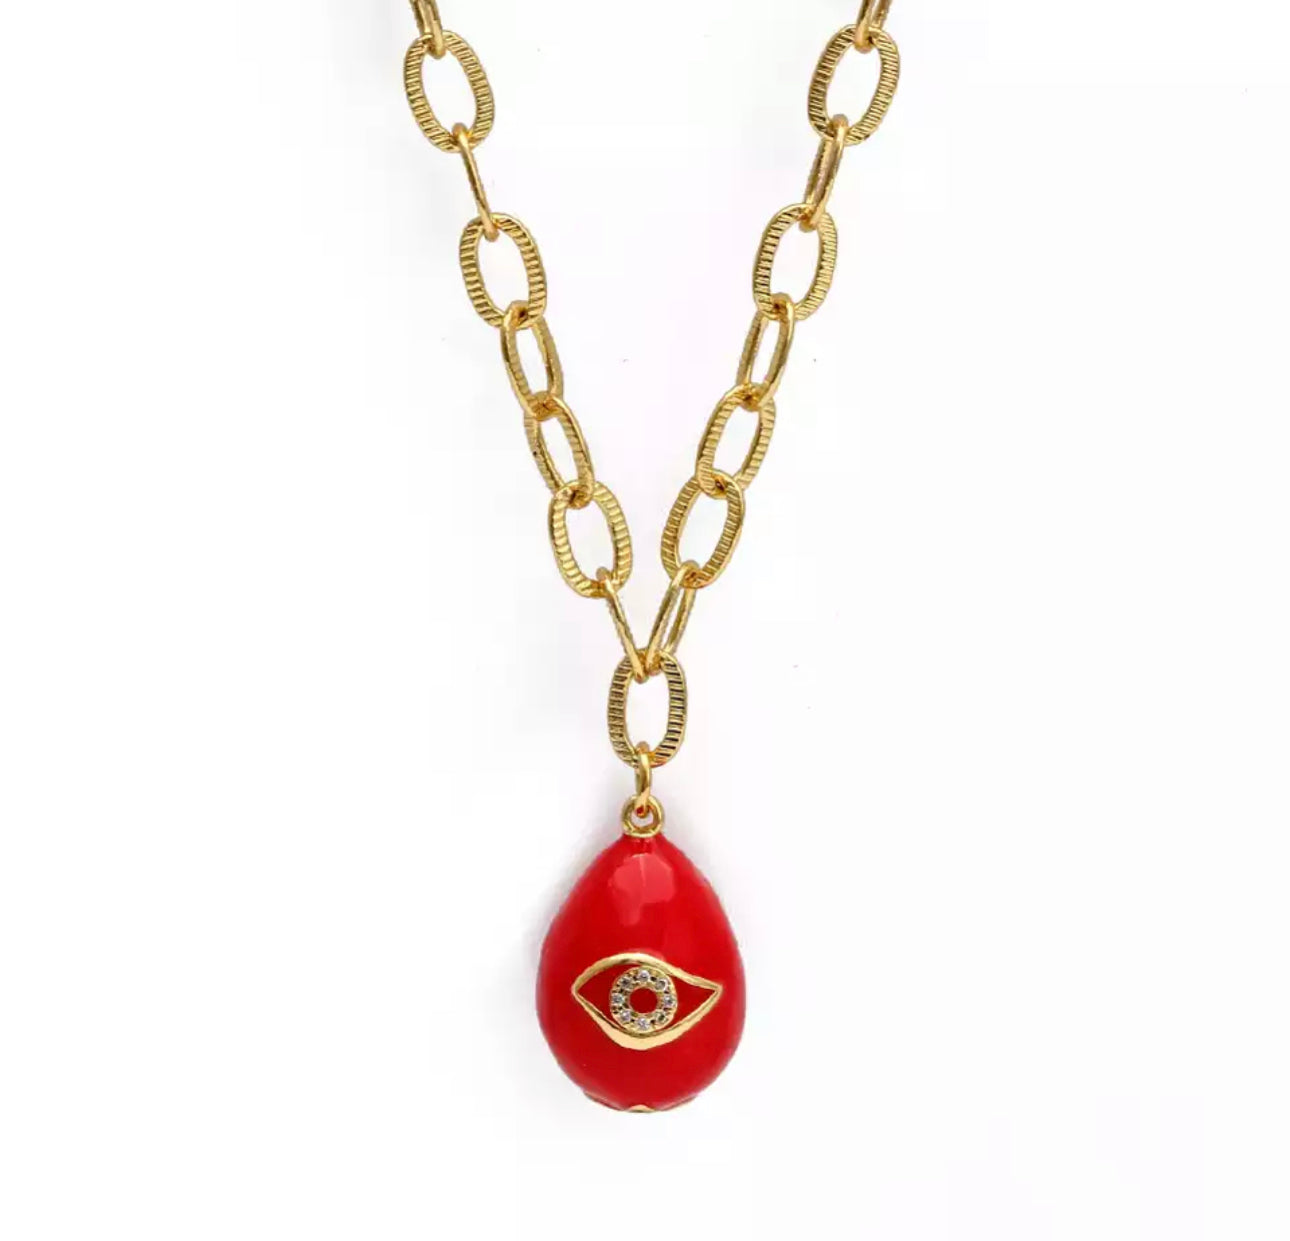 chain link with red evil eye pendant